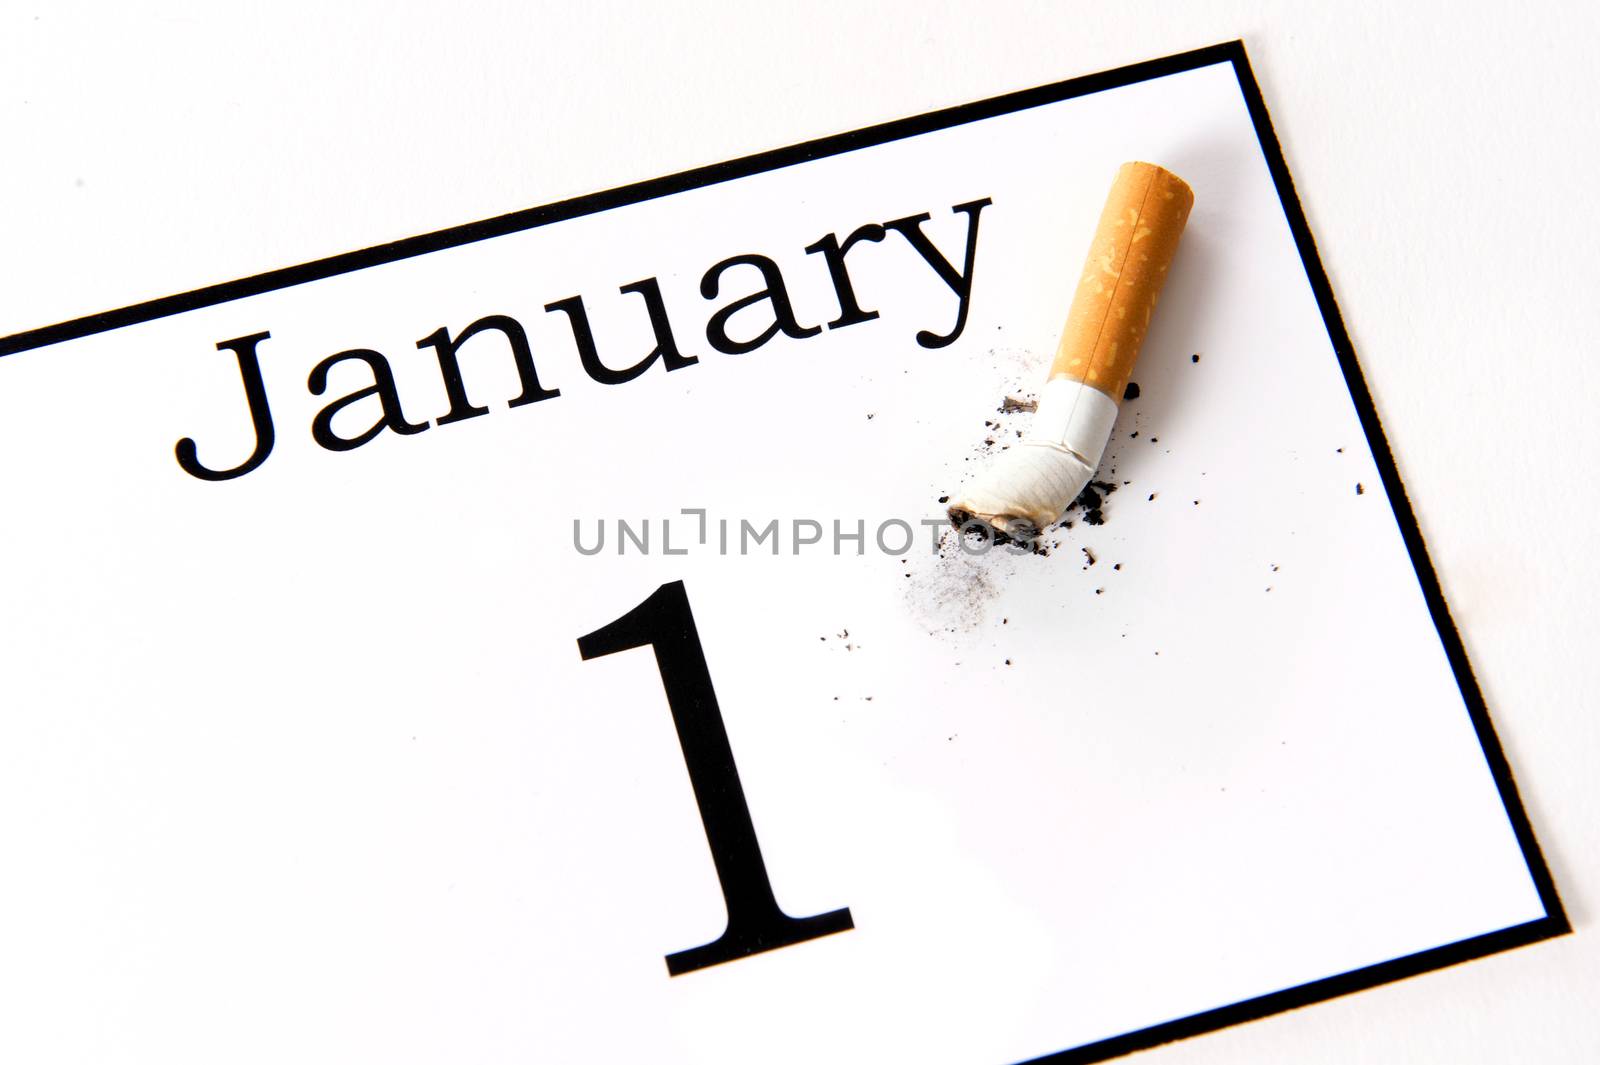 New Years Resolution quit smoking isolated on white background